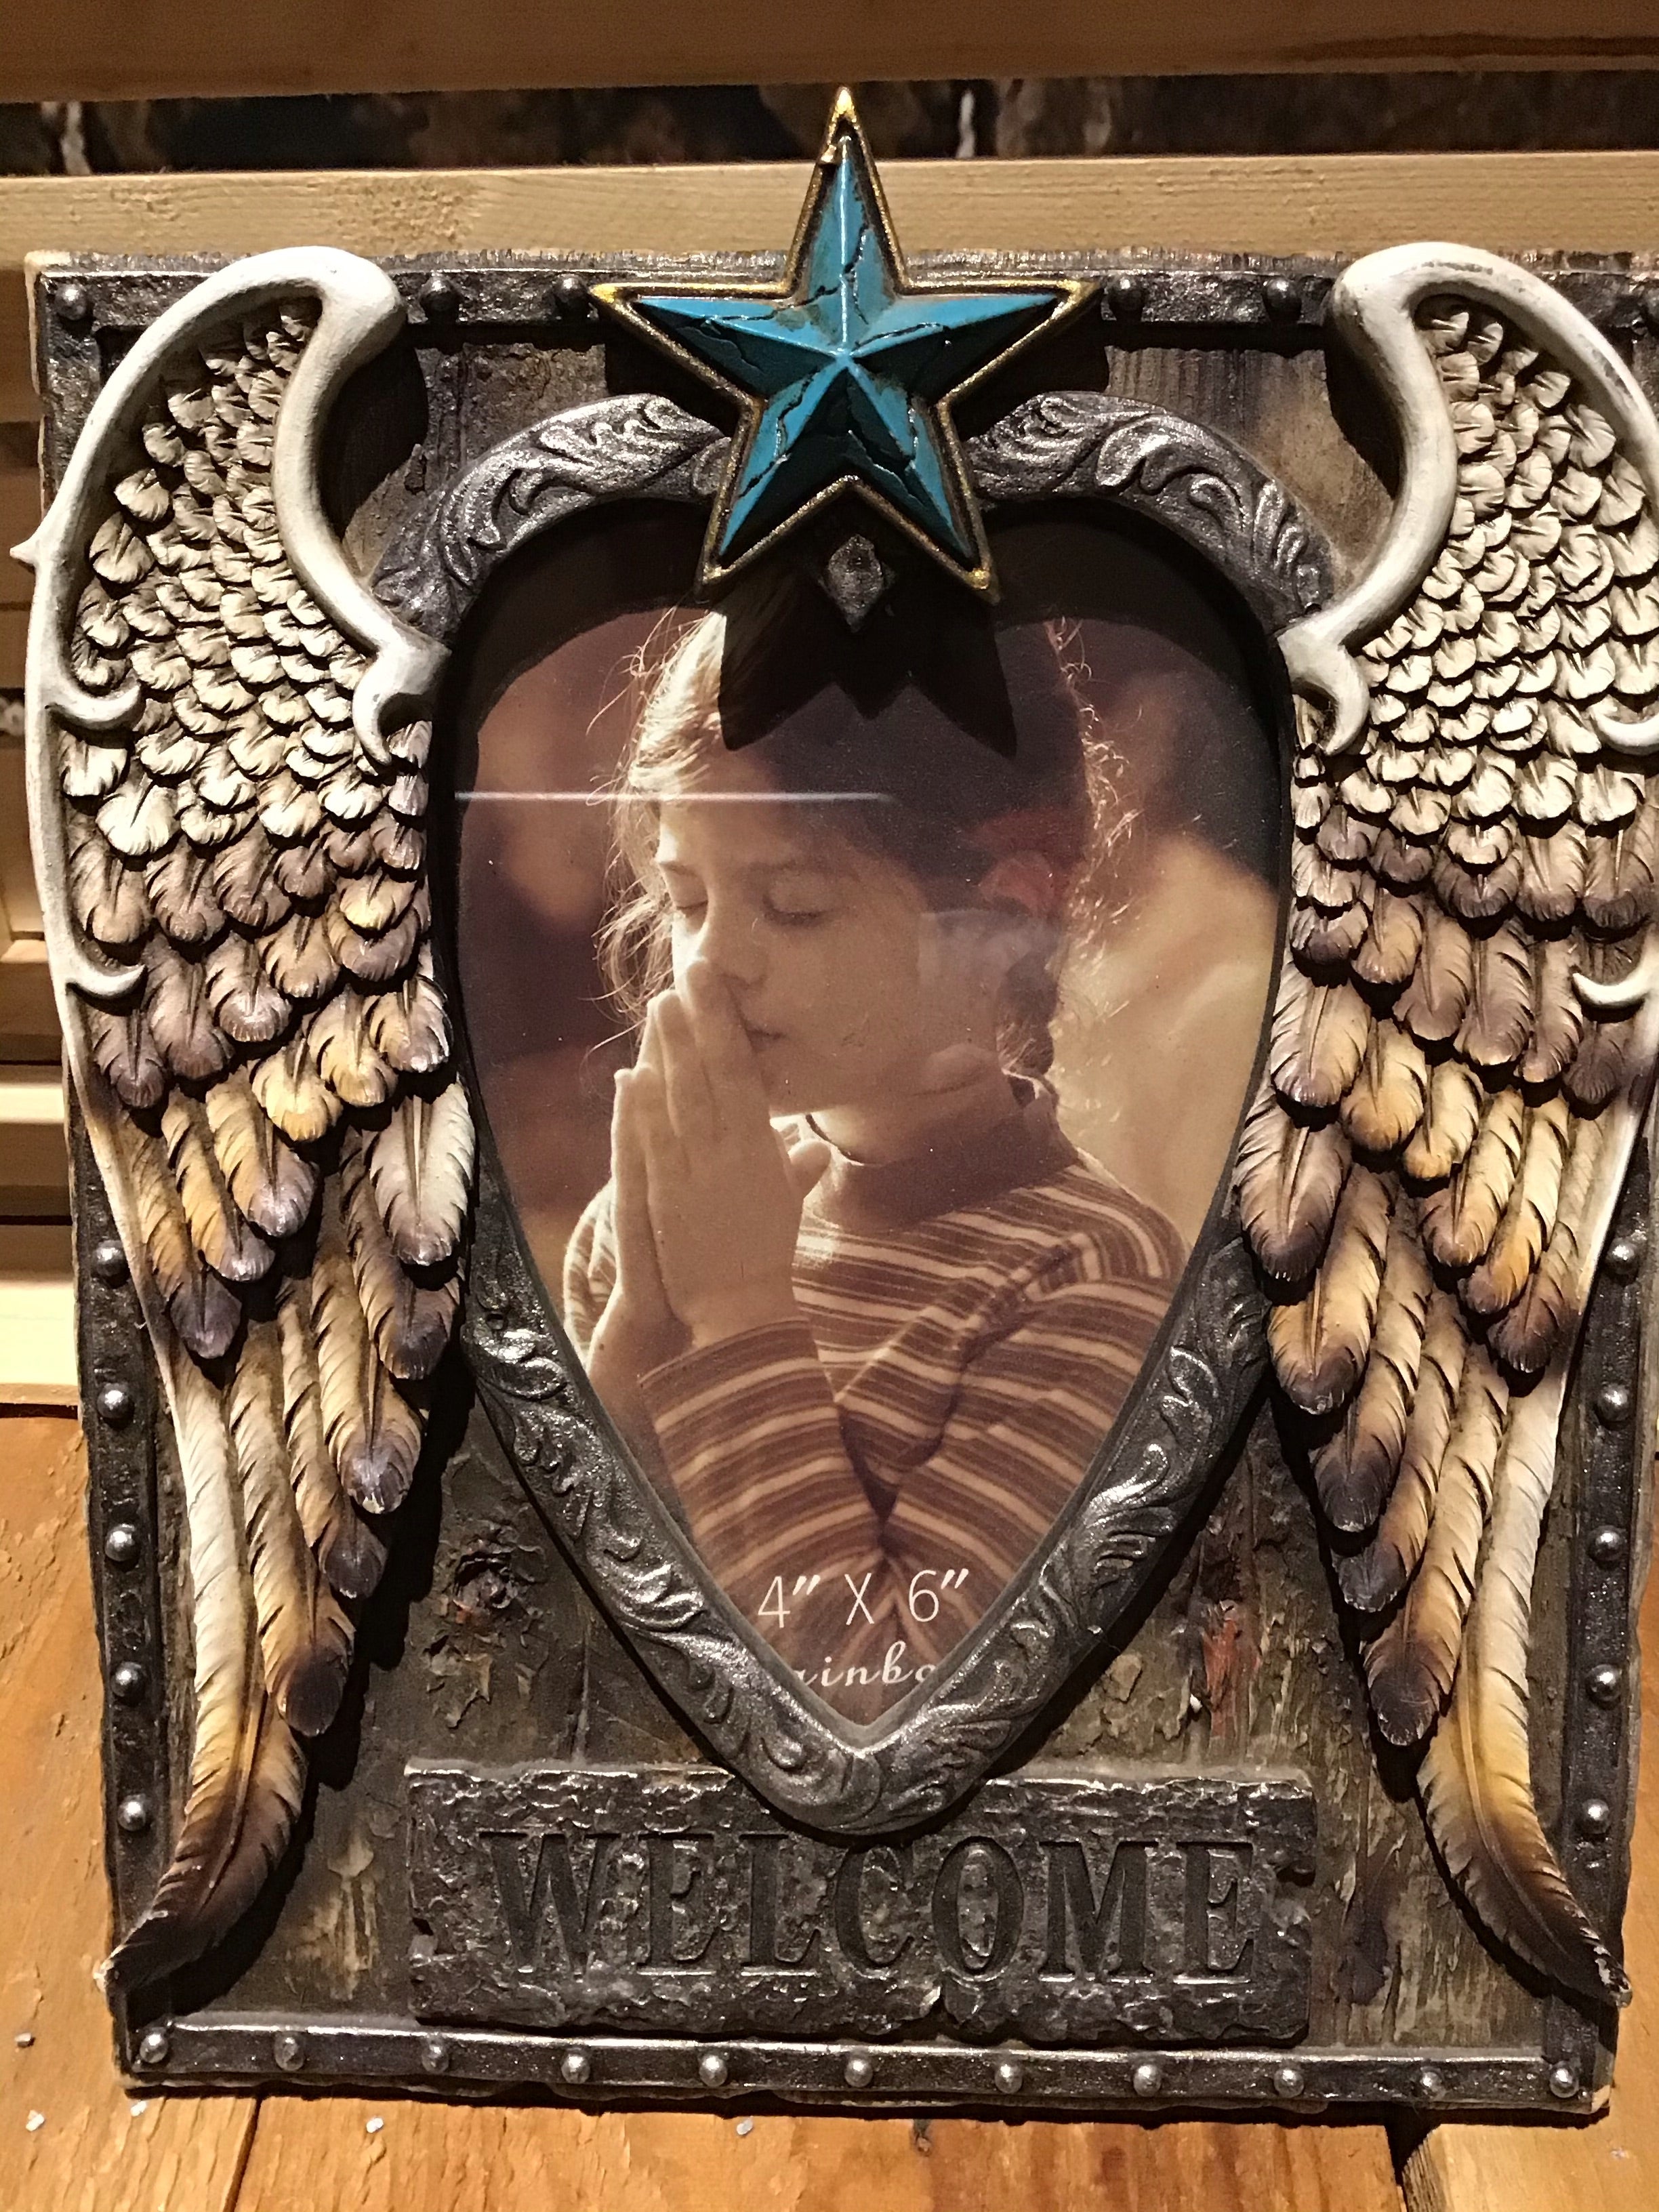 Angel heart shaped wing teal blue star welcome Photo Frame Western décor photo frame 4 x 6